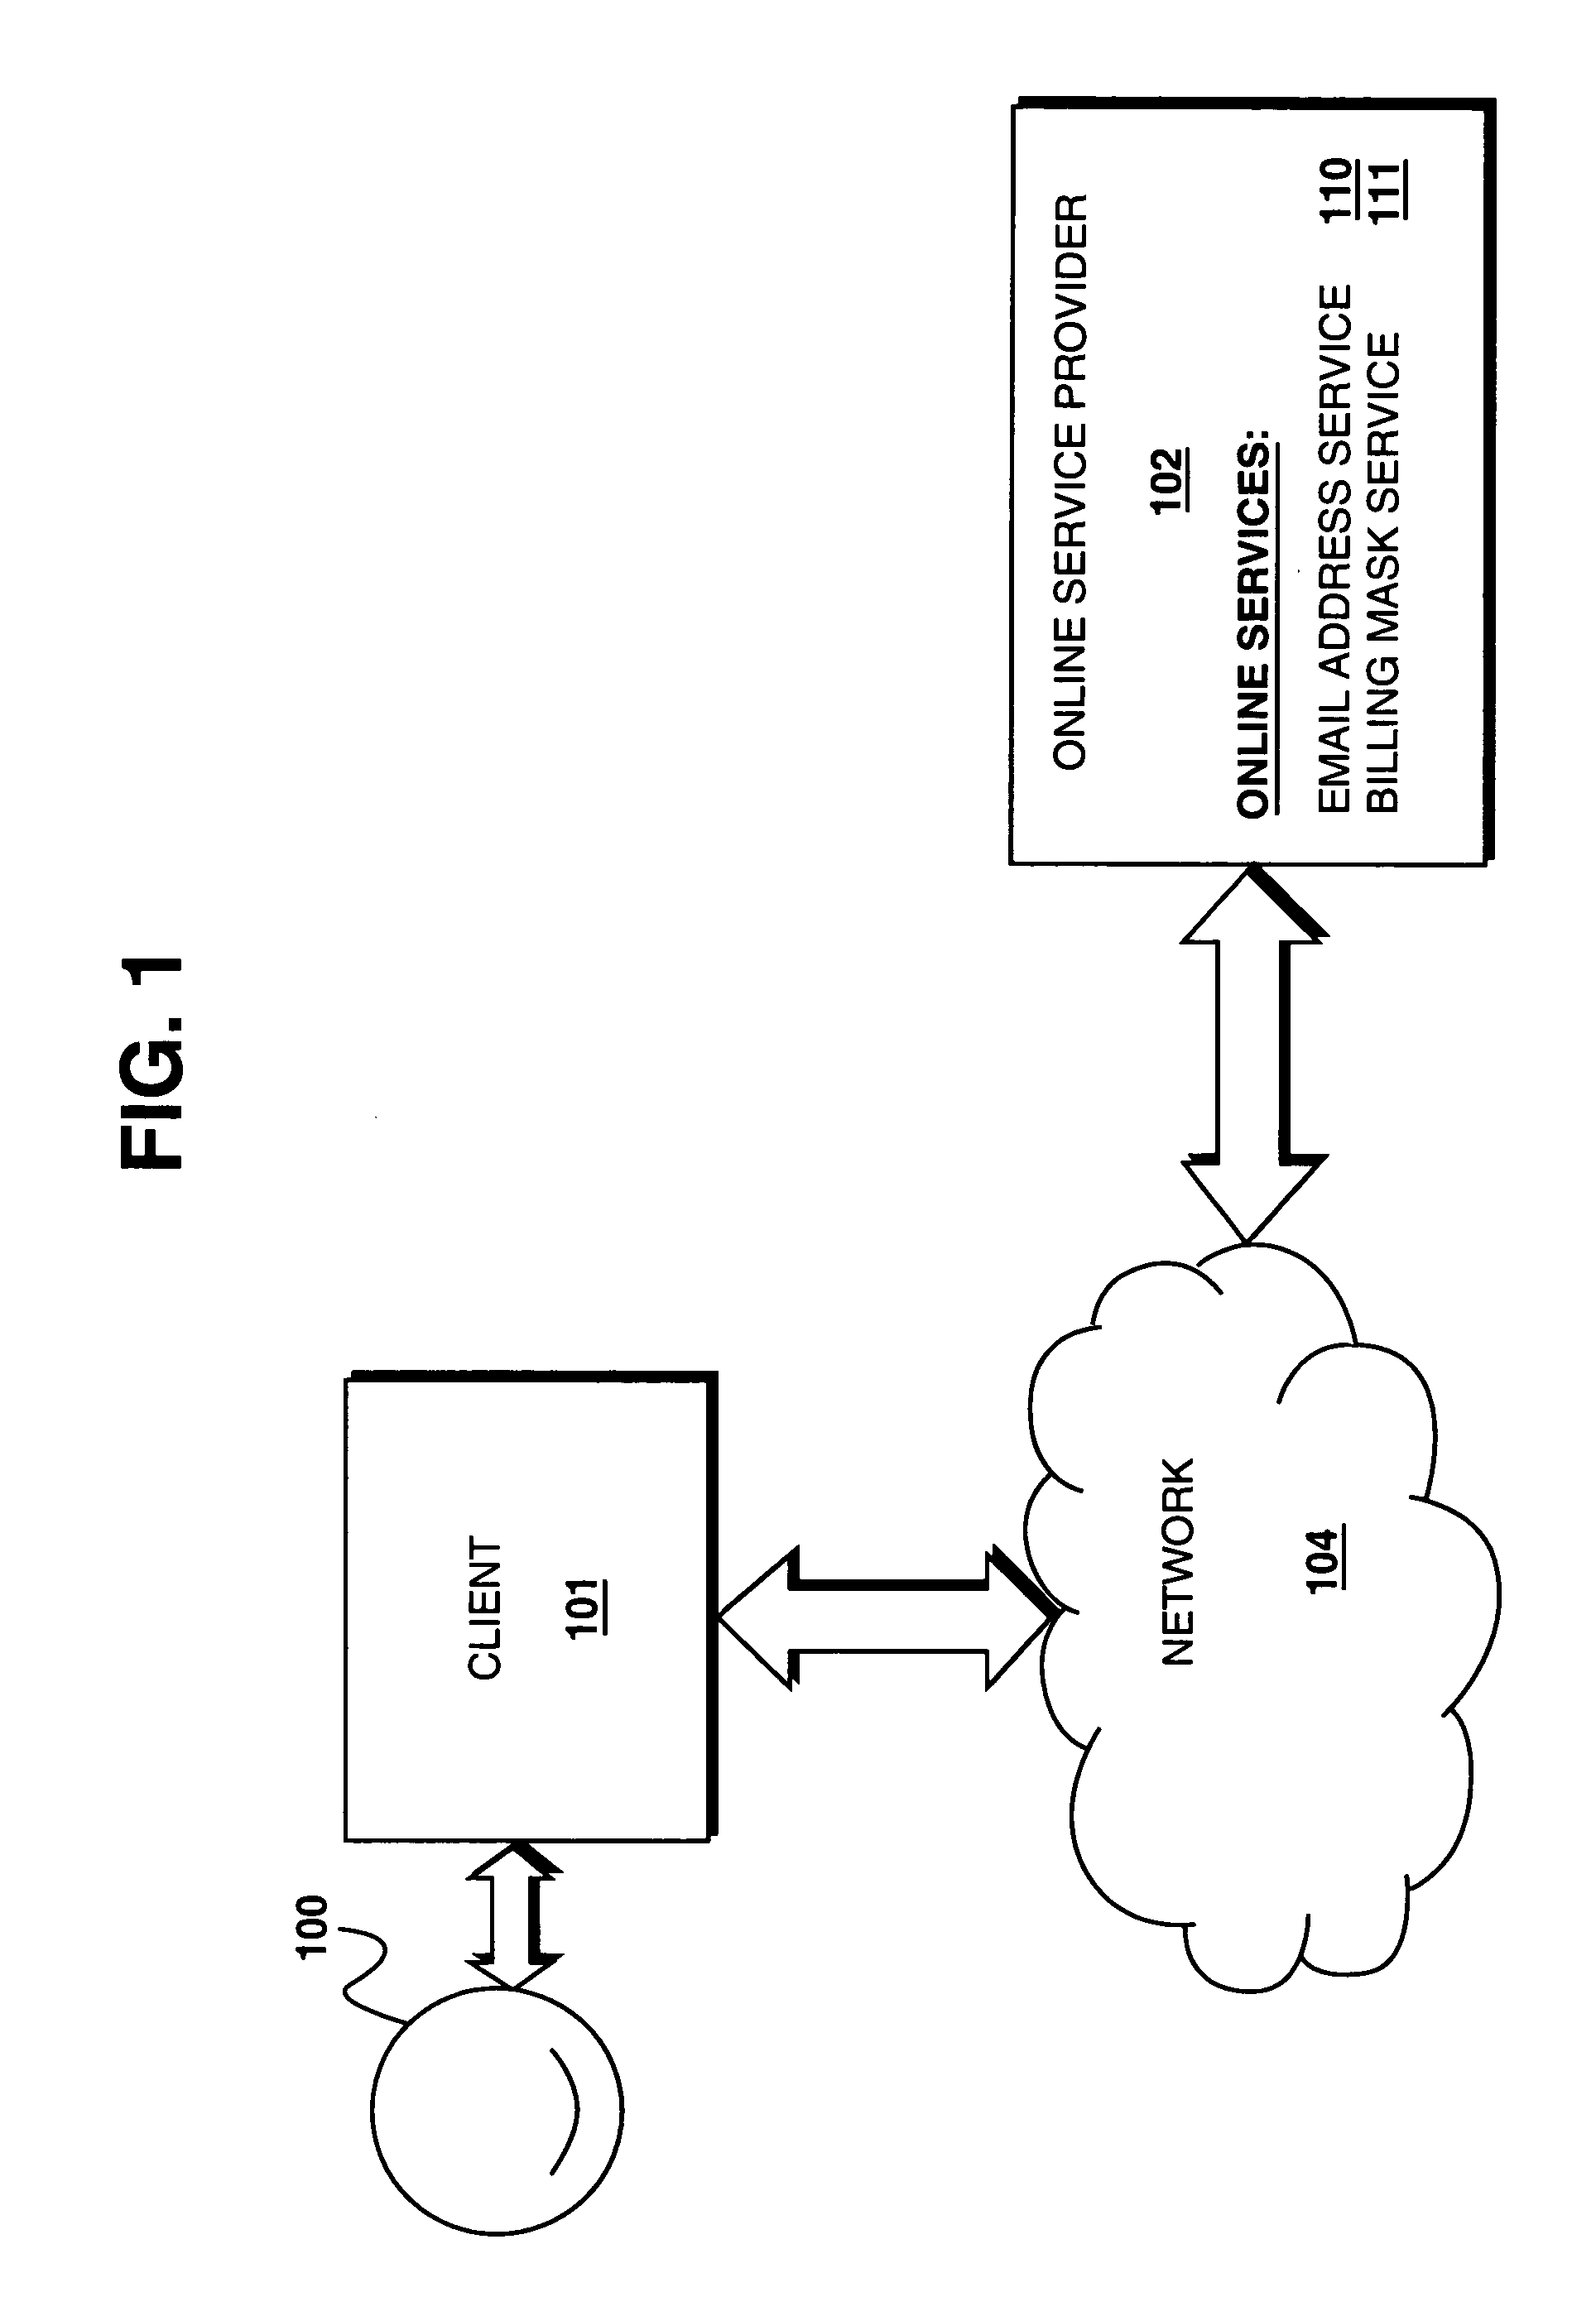 Method and apparatus for simplified access to online services